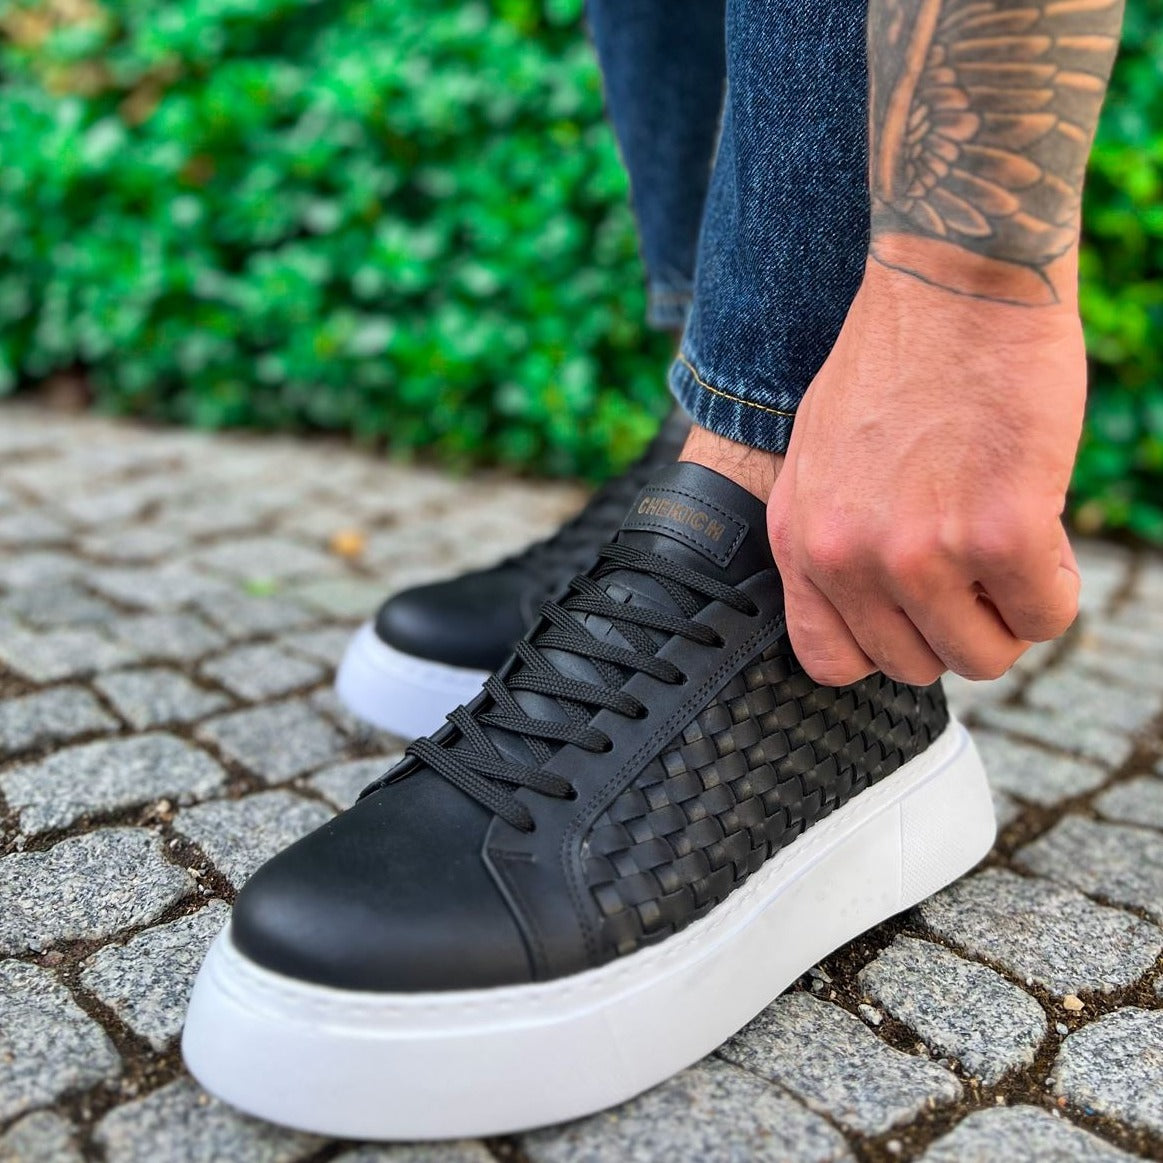 Casual Fashionable Sneakers for Men by Apollo Moda | Luzern Shadow Contrast